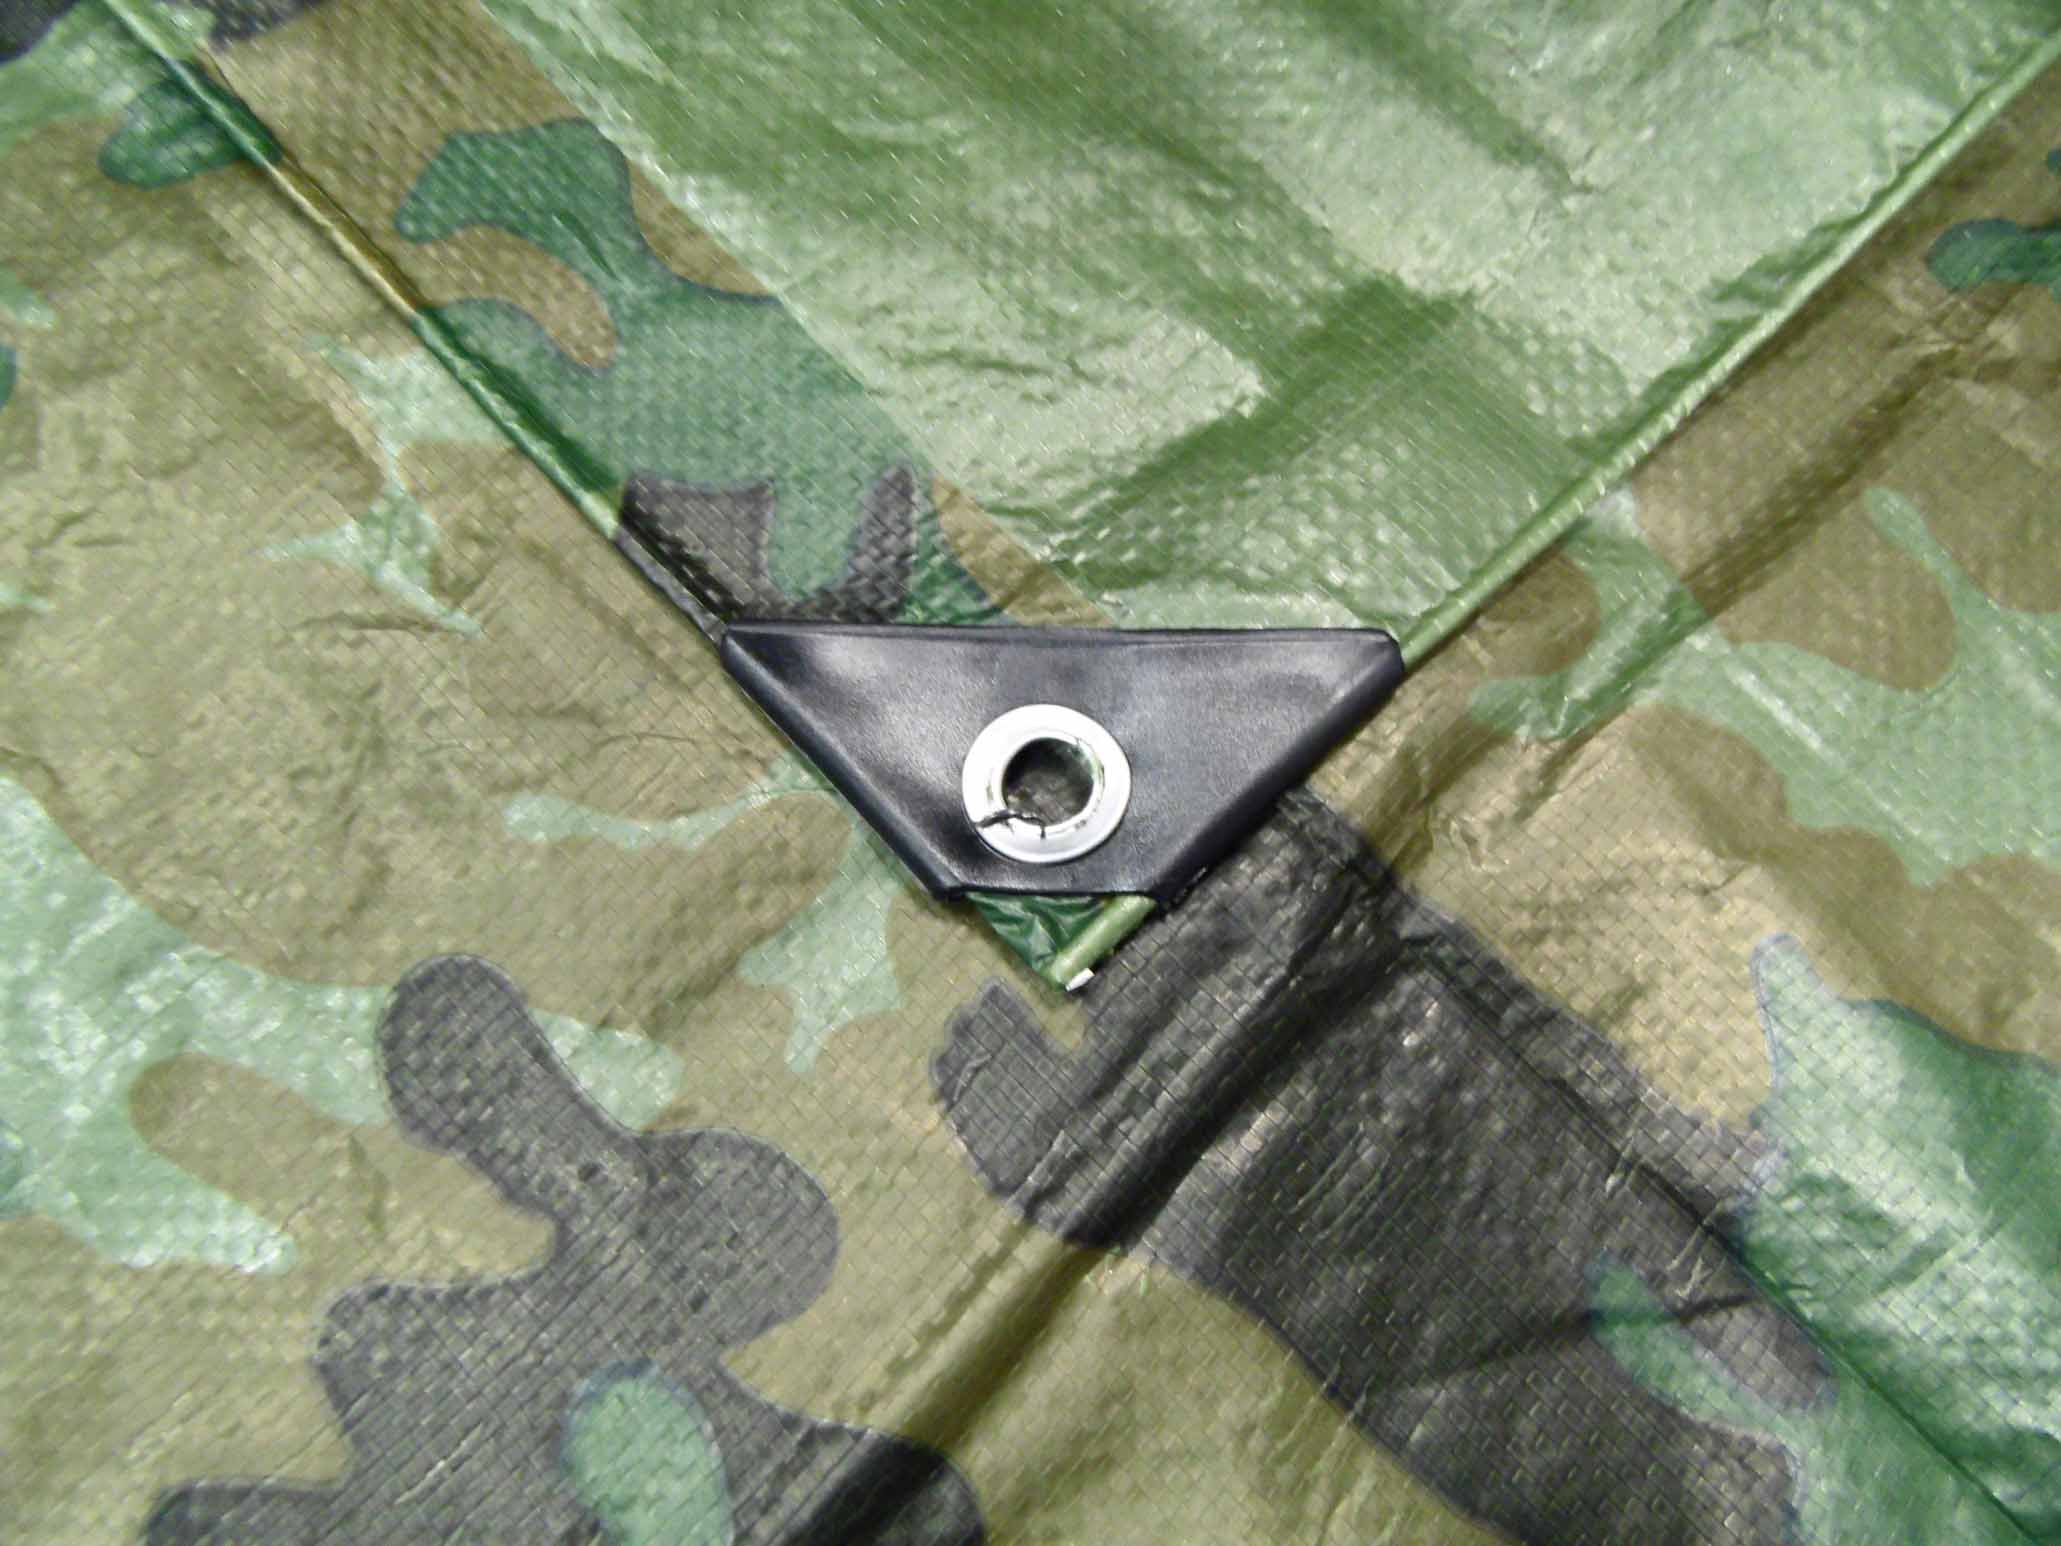 2.7M x 3.5M ARMY CAMOUFLAGE WATERPROOF TARPAULIN SHEET TARP COVER WITH EYELETS 